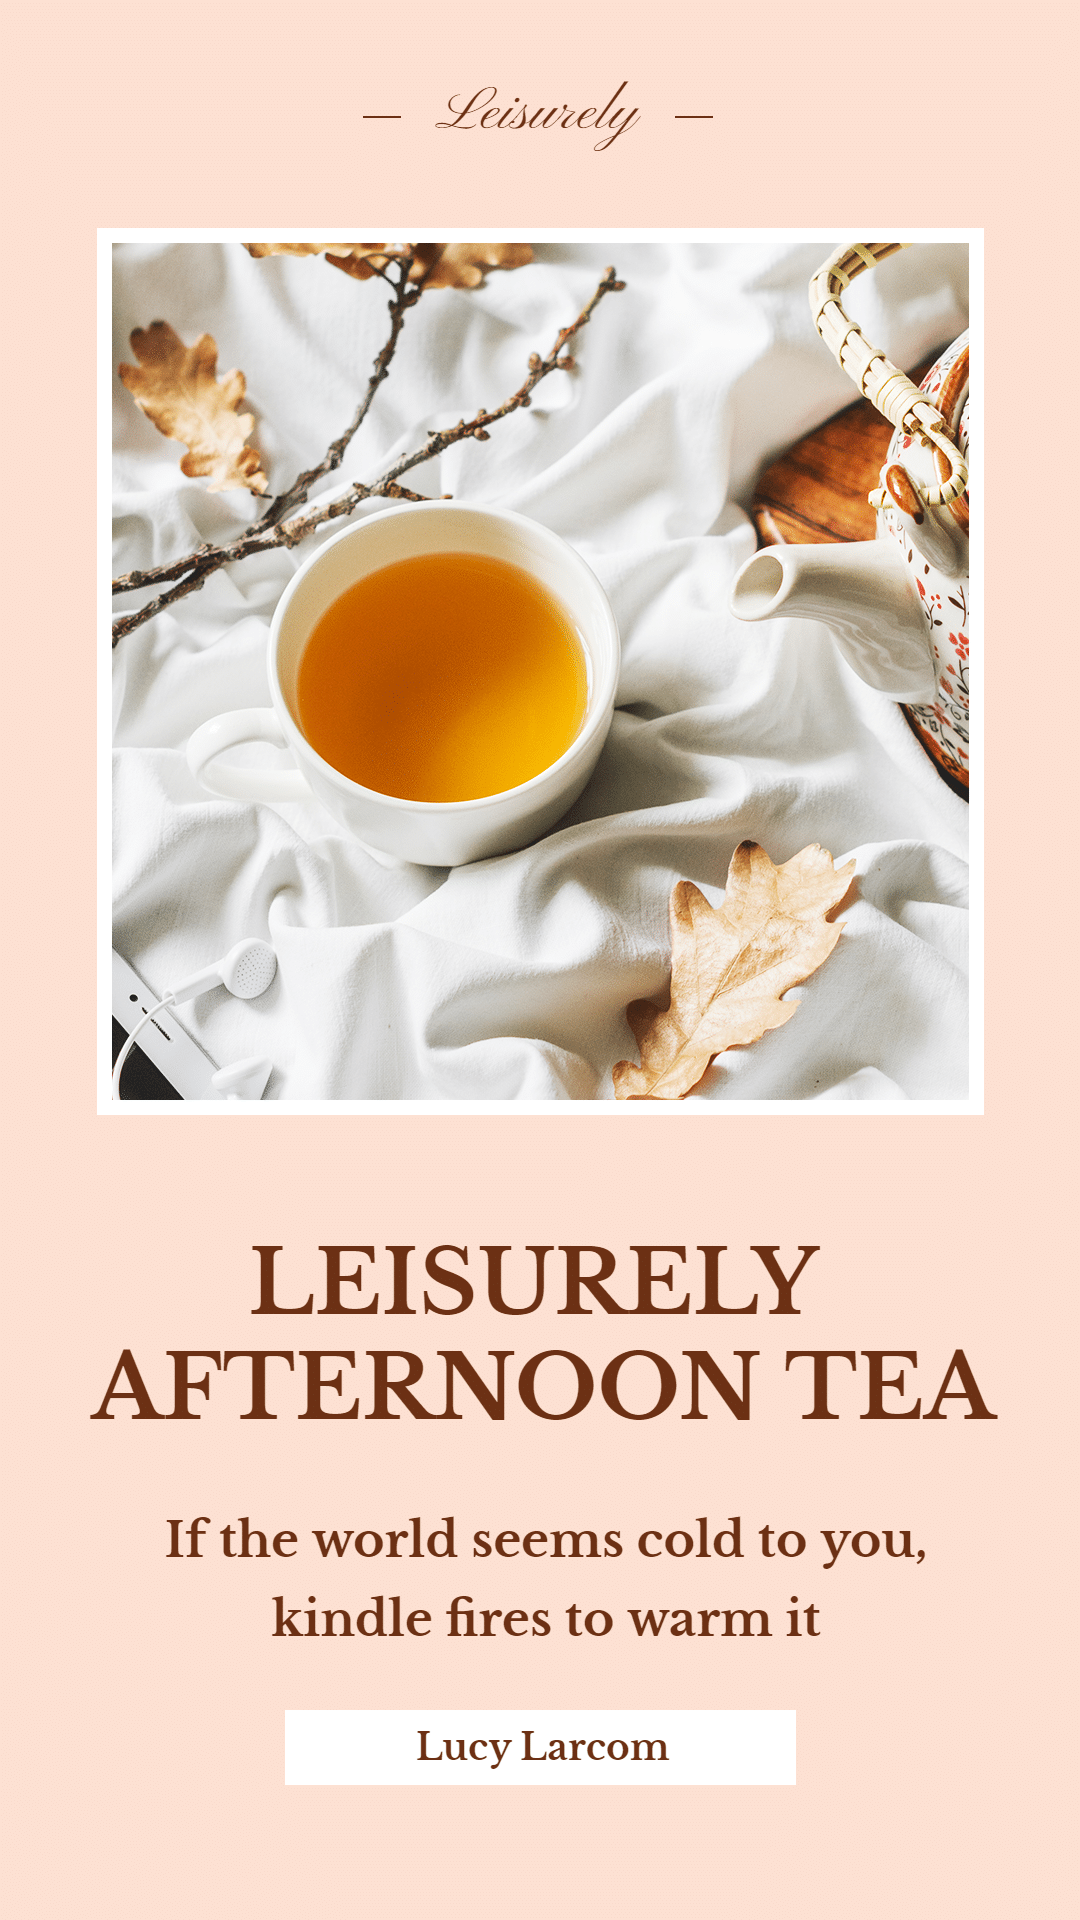 Literary Style Afternoon Tea Display Ecommerce Story预览效果